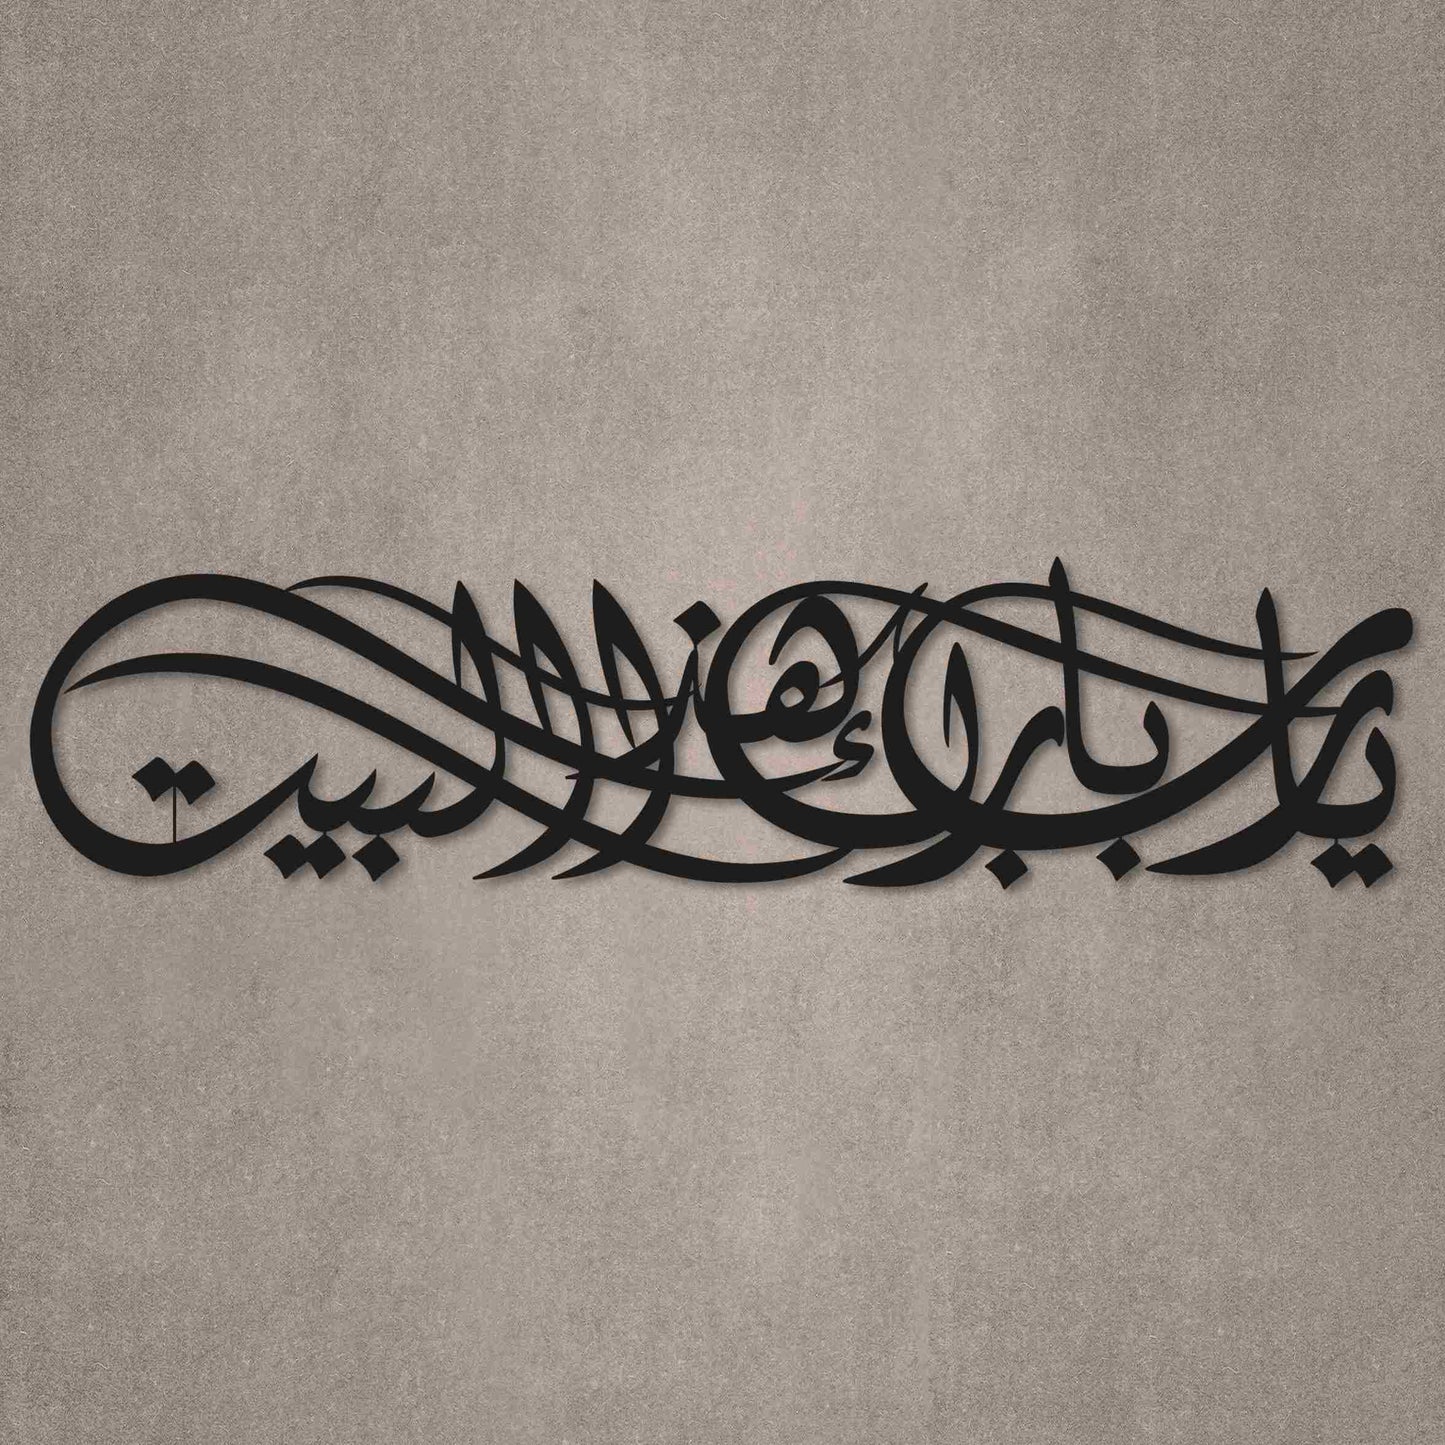 Bless This House - Islamic Calligraphic Metal Wall Art